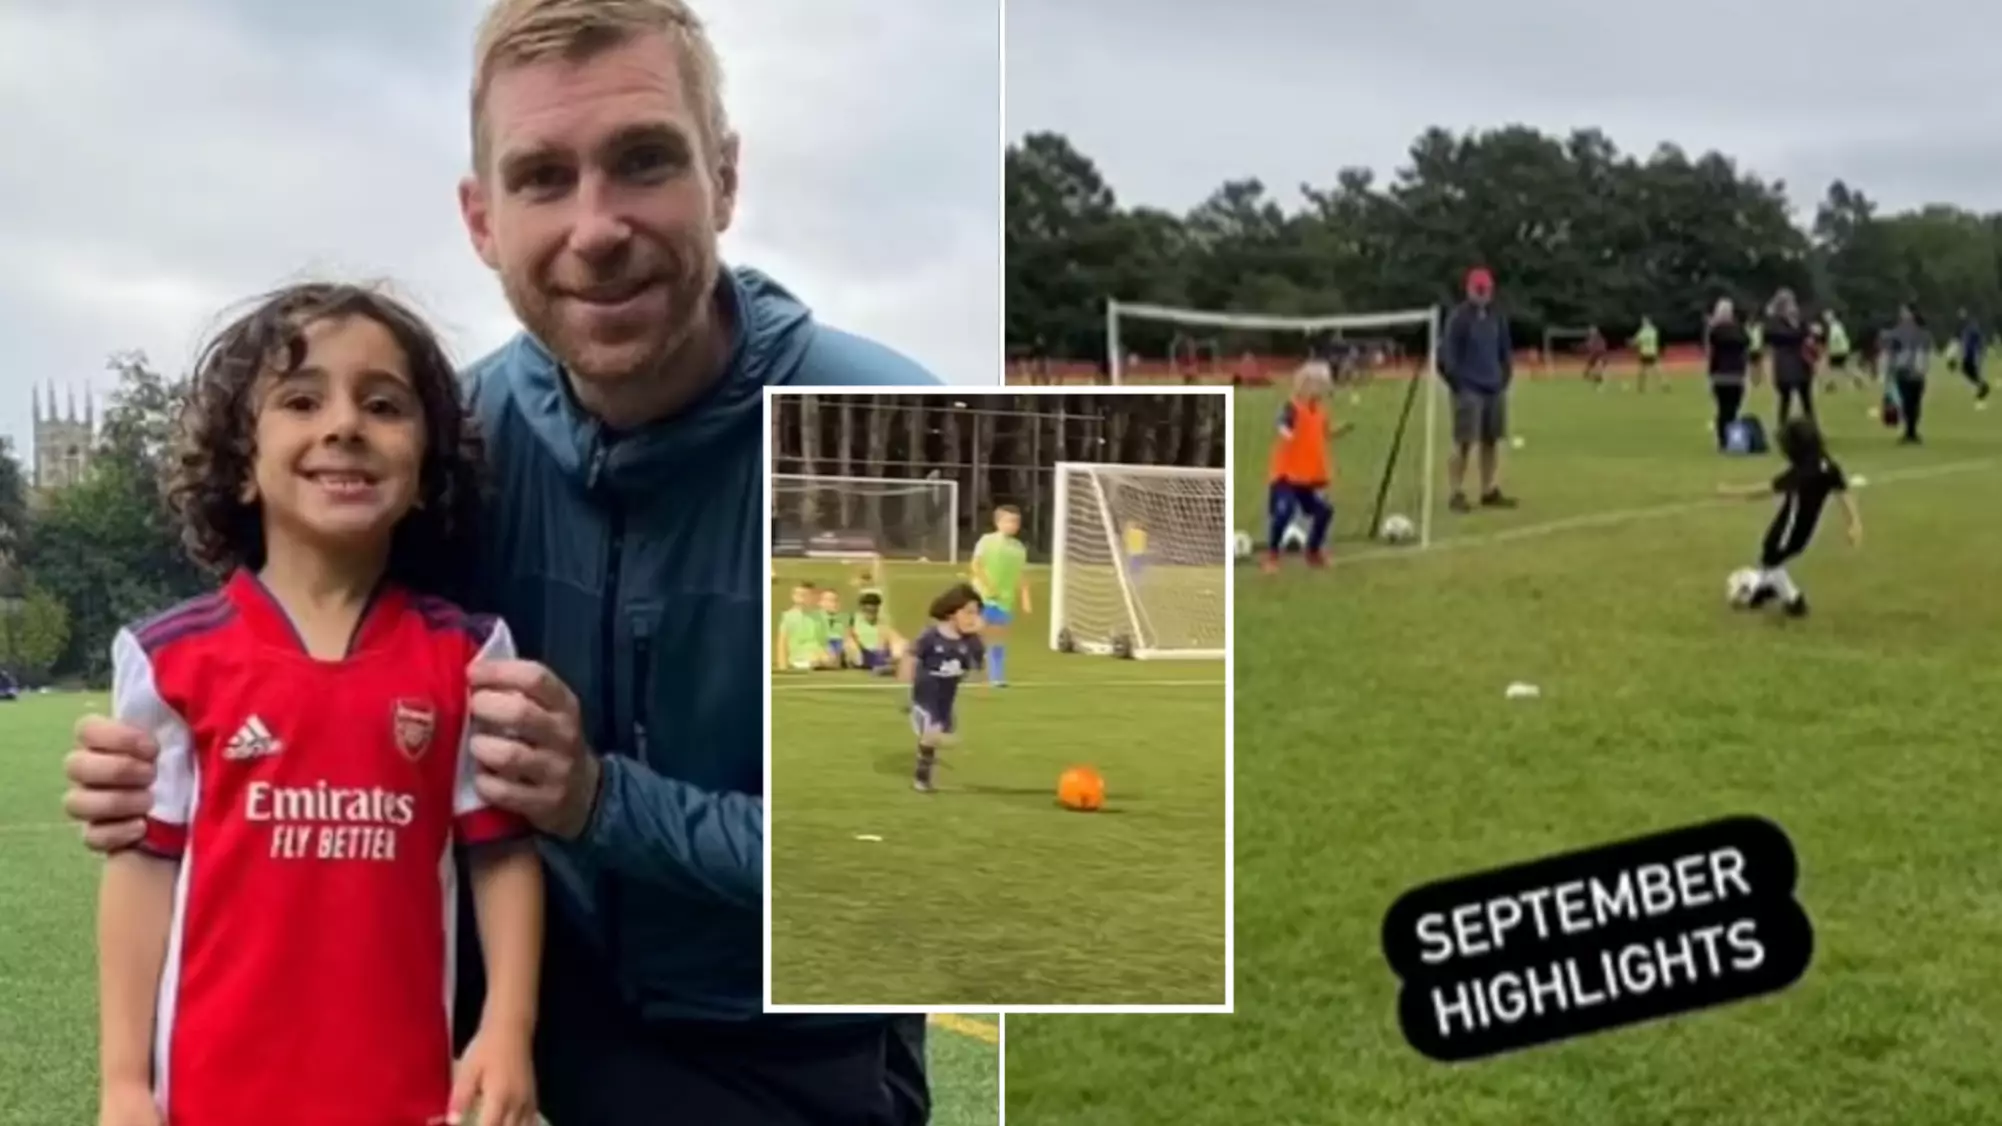 Arsenal Signed Four-Year-Old Nicknamed 'Little Messi', He's Still In Nursery